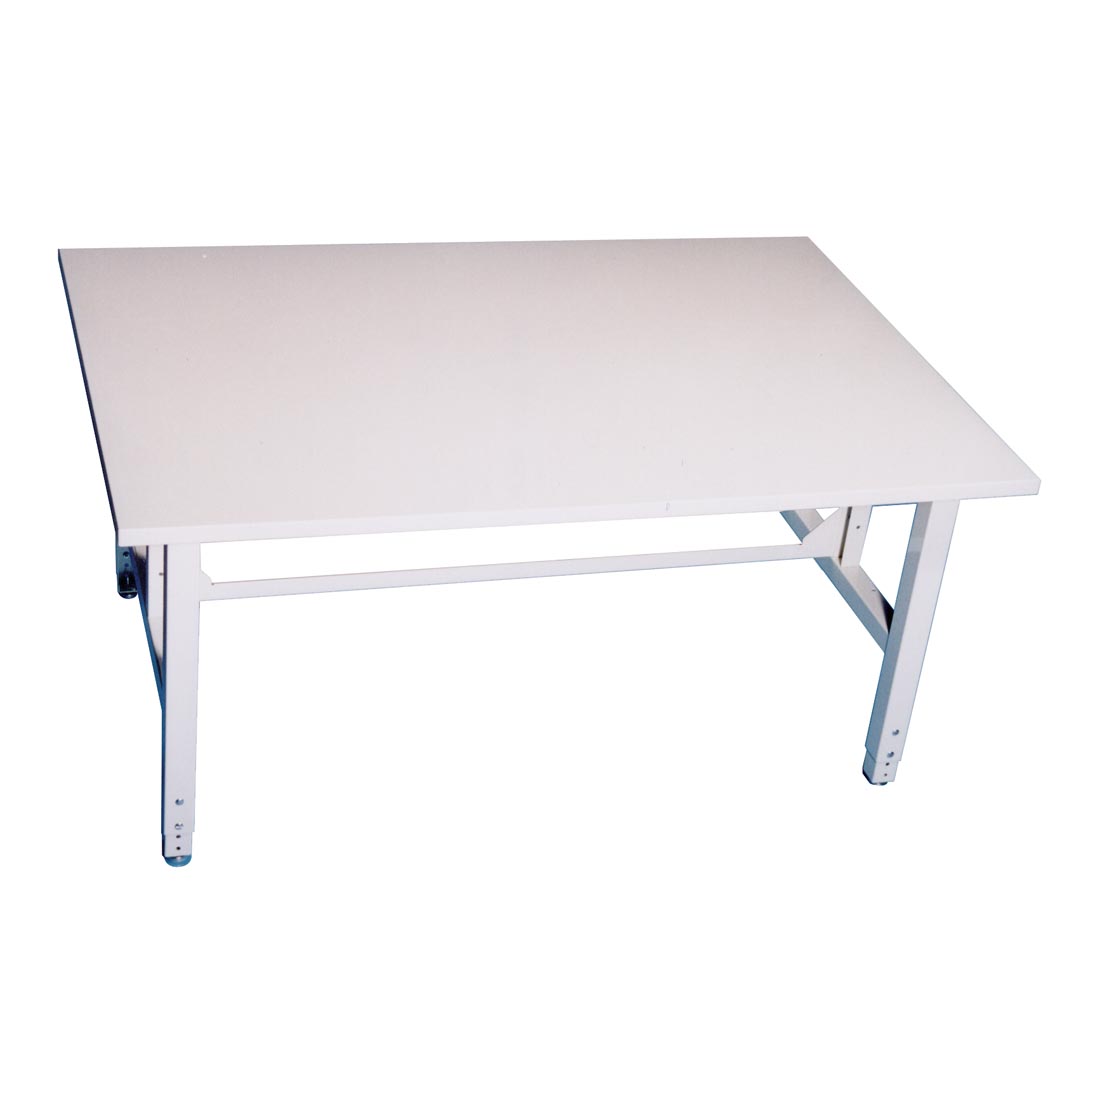 Debcor Adjustable Height Square Edge Art & Activity Table